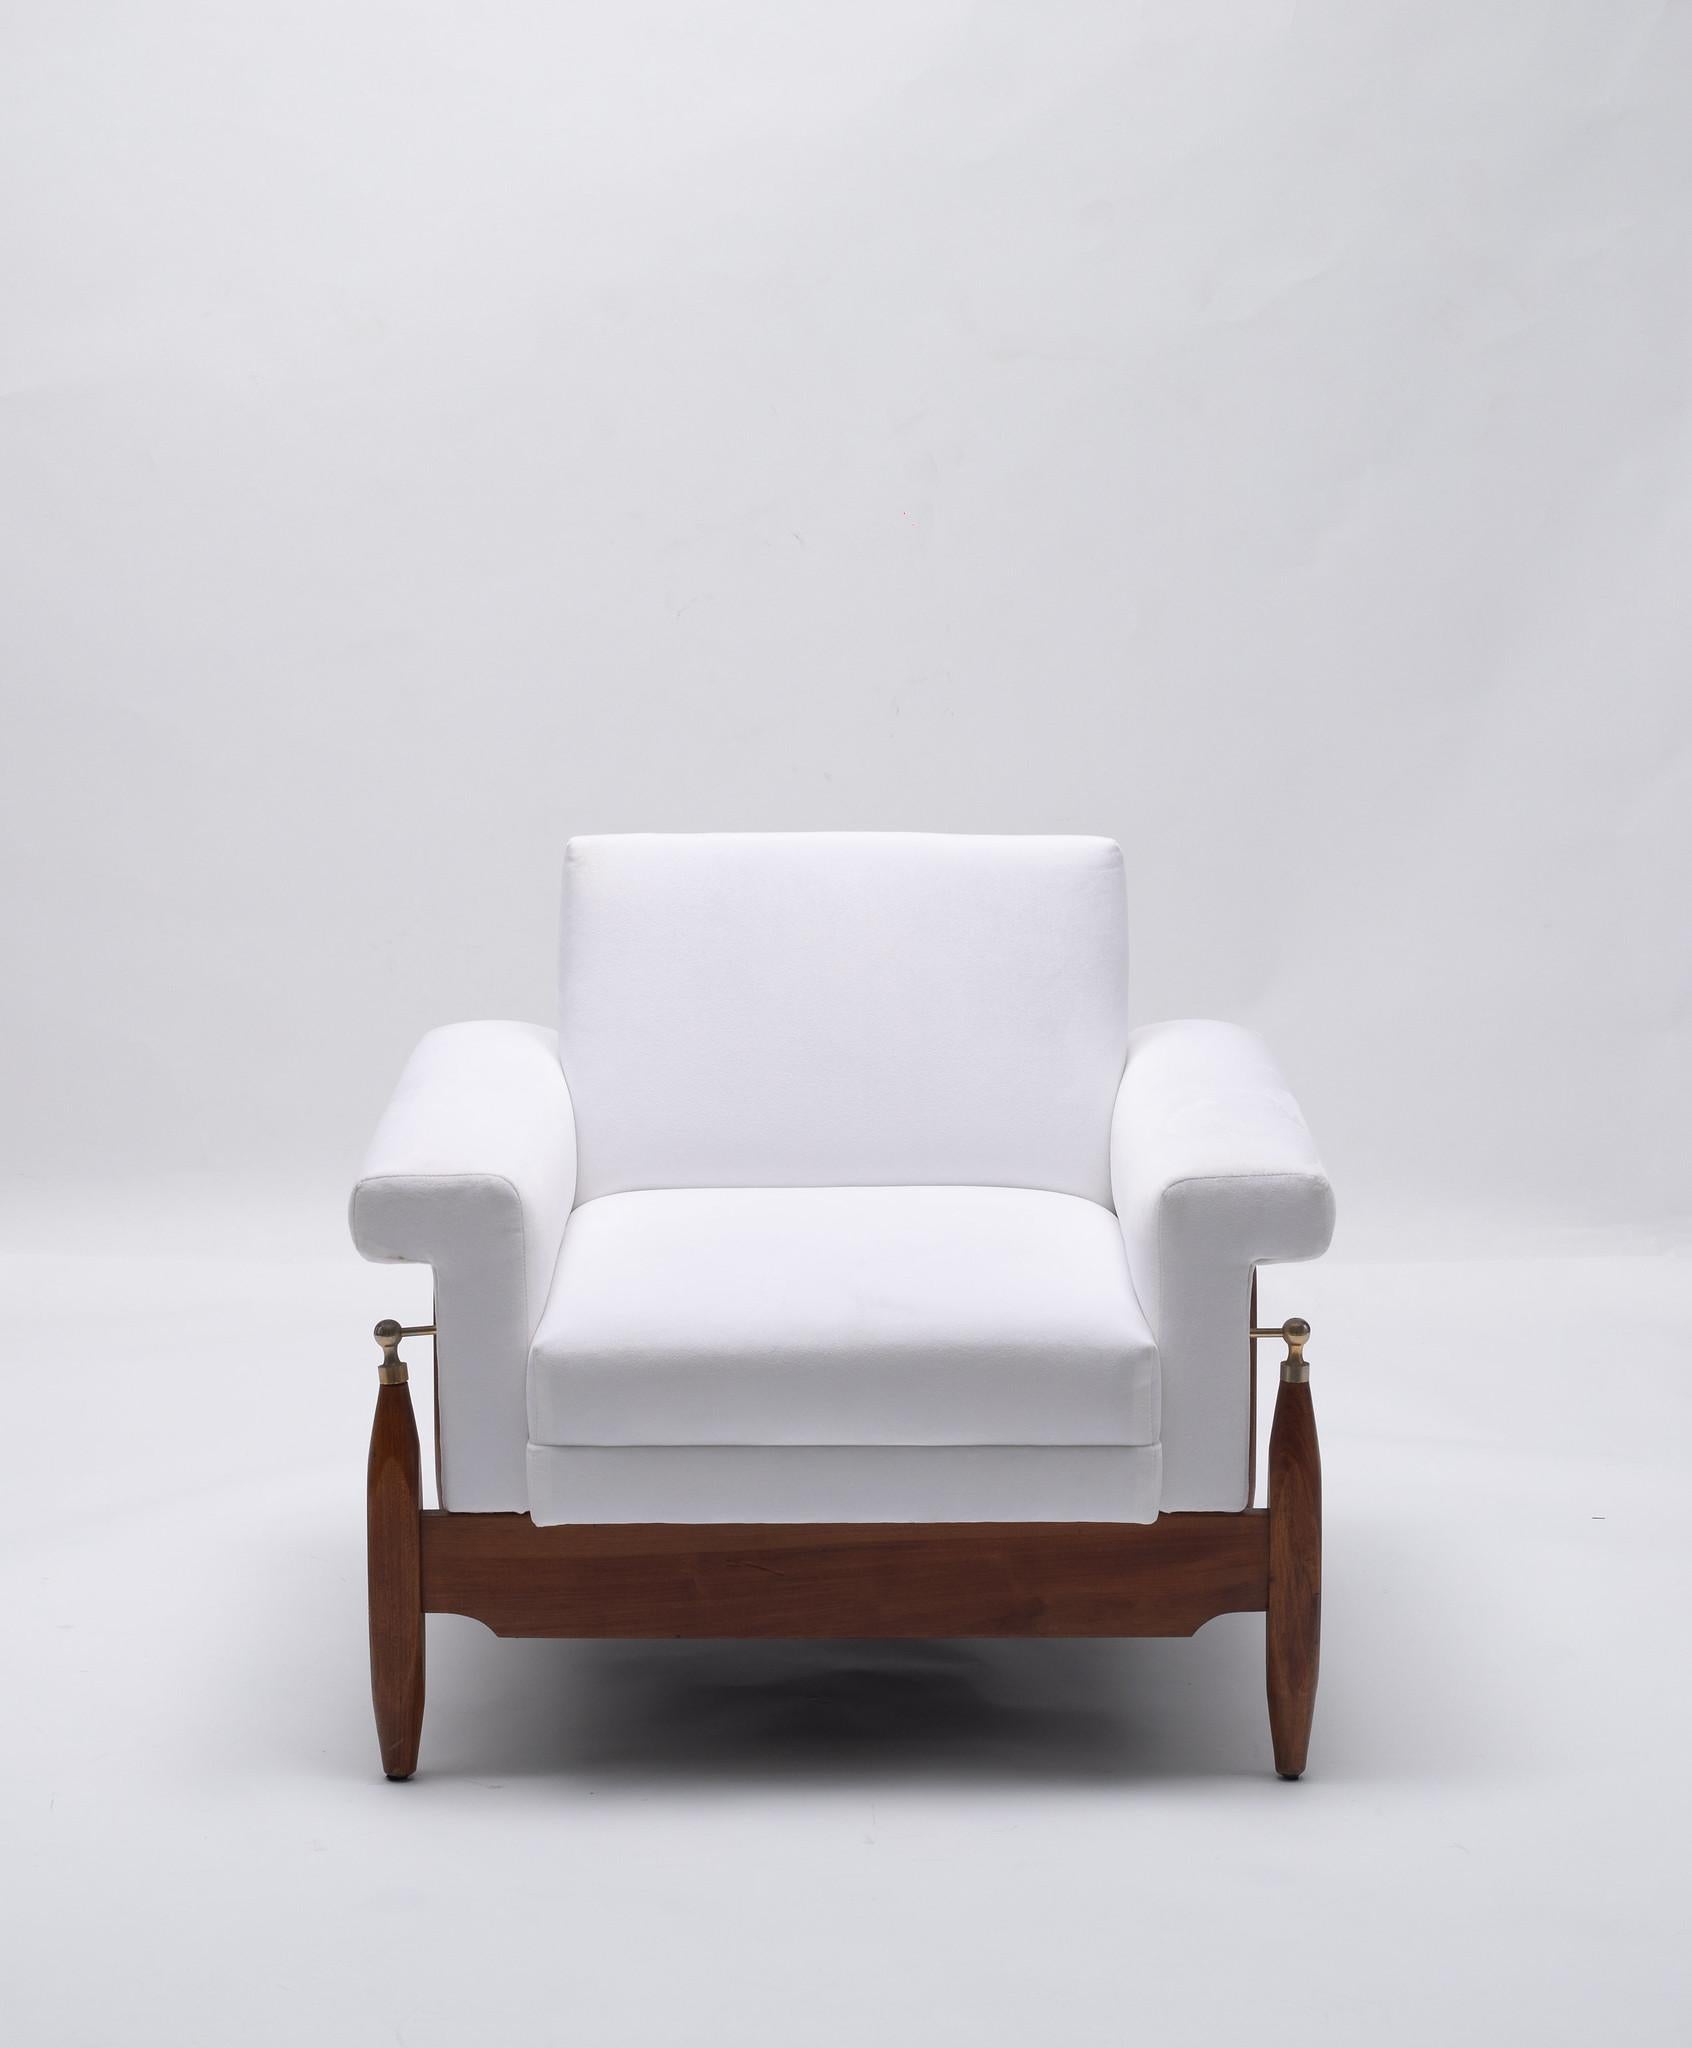 A stylized chic Italian lounge chair. Sturdy solid fruitwood frame with steel stanchions that support arms and seat. All professionally padded and upholstered in a low pile white velvet.